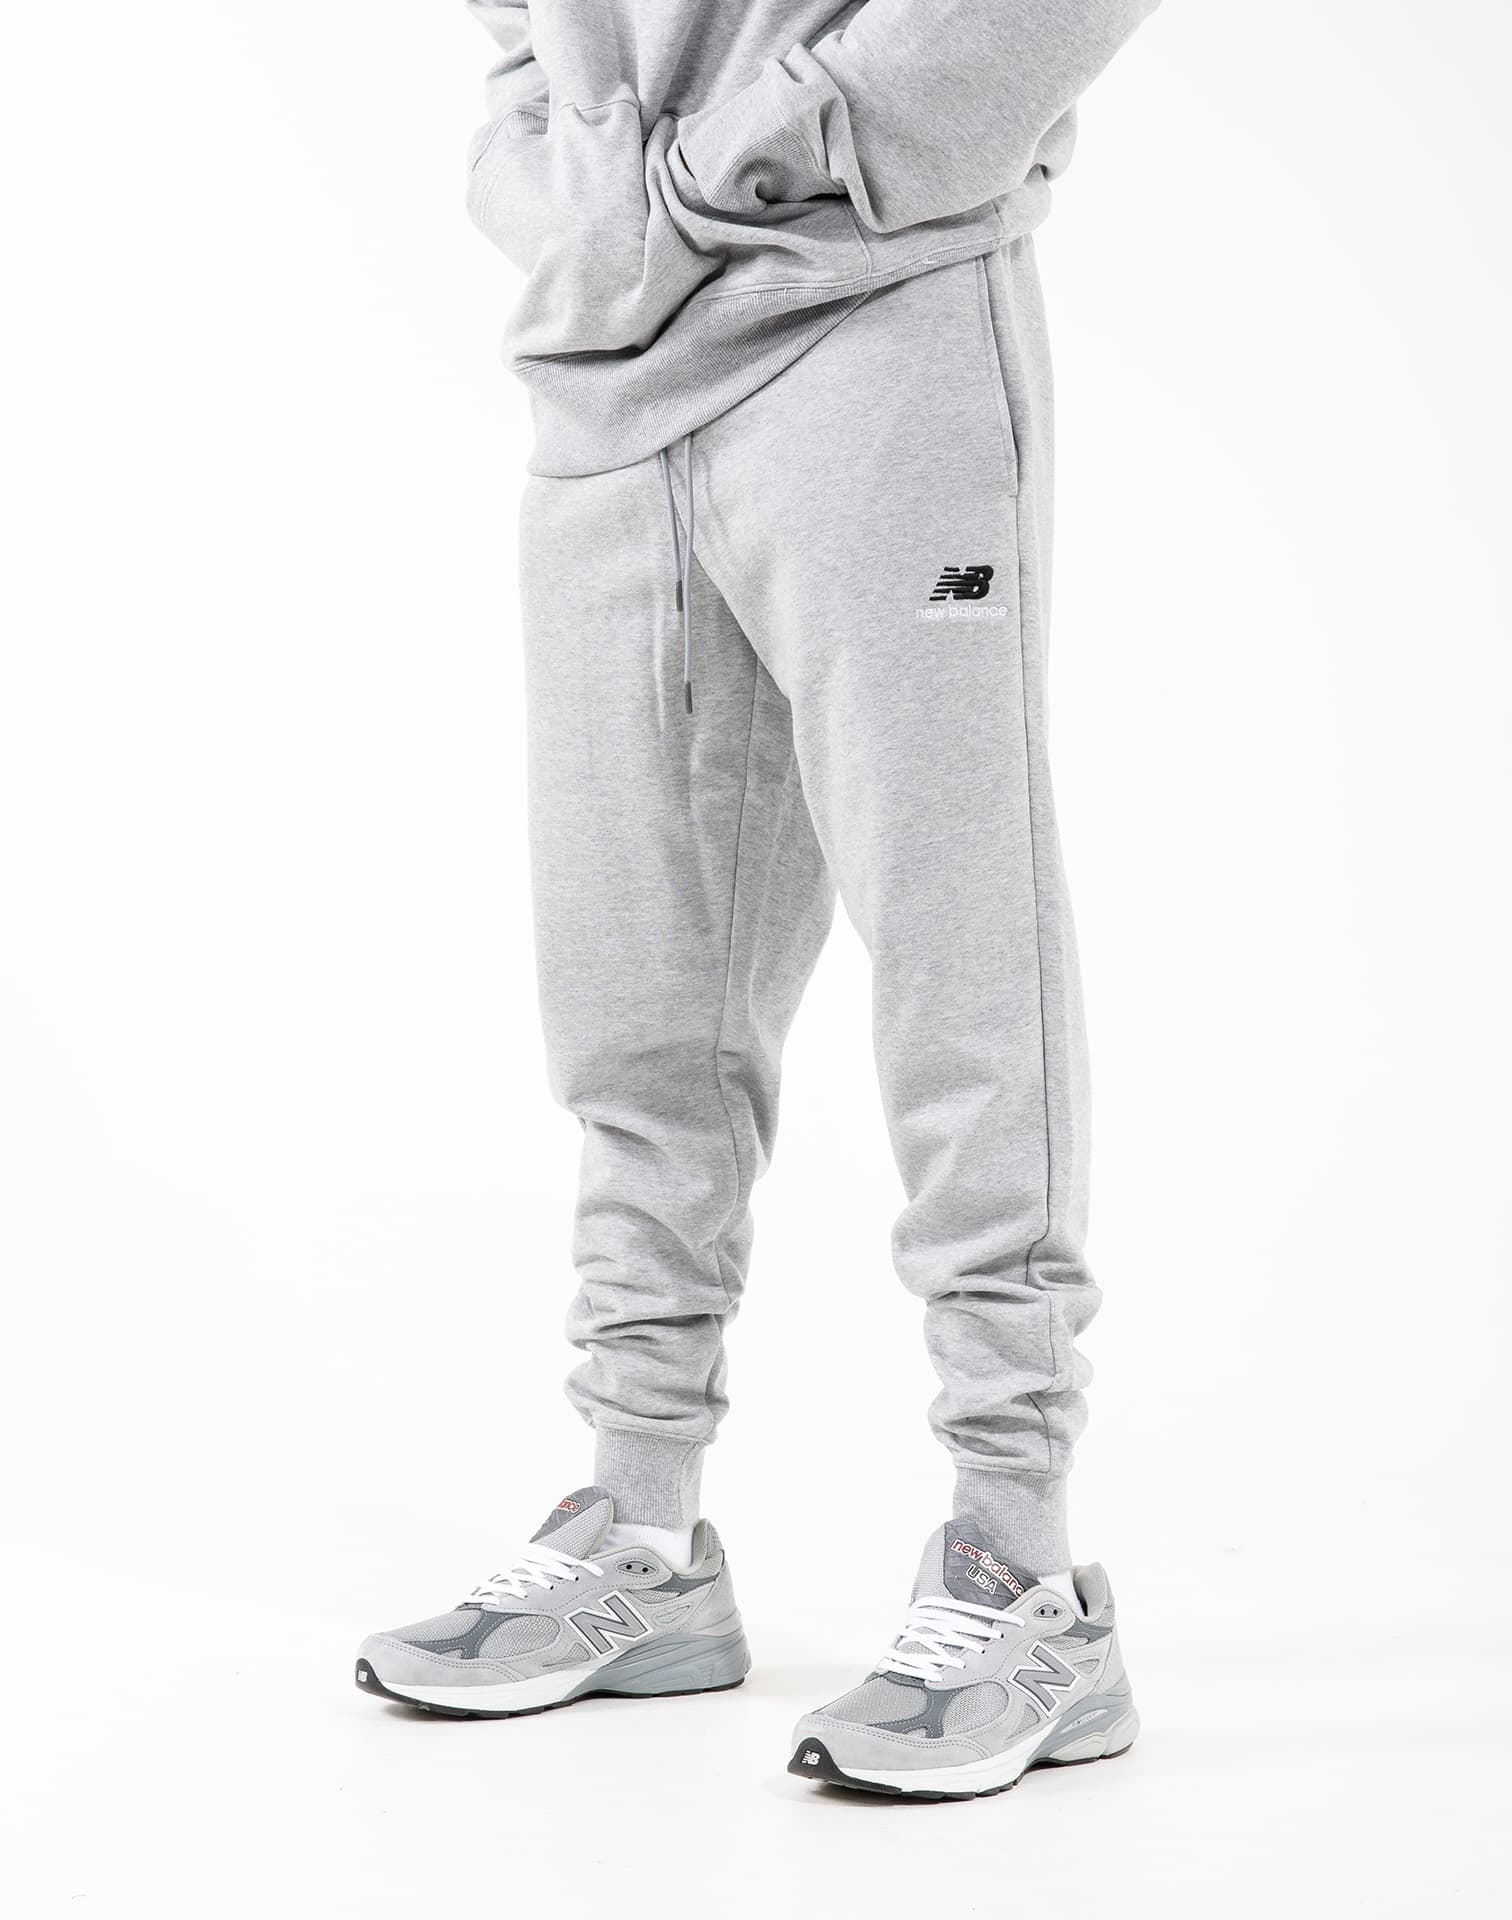 New Balance life in balance joggers in grey - ShopStyle Activewear Trousers